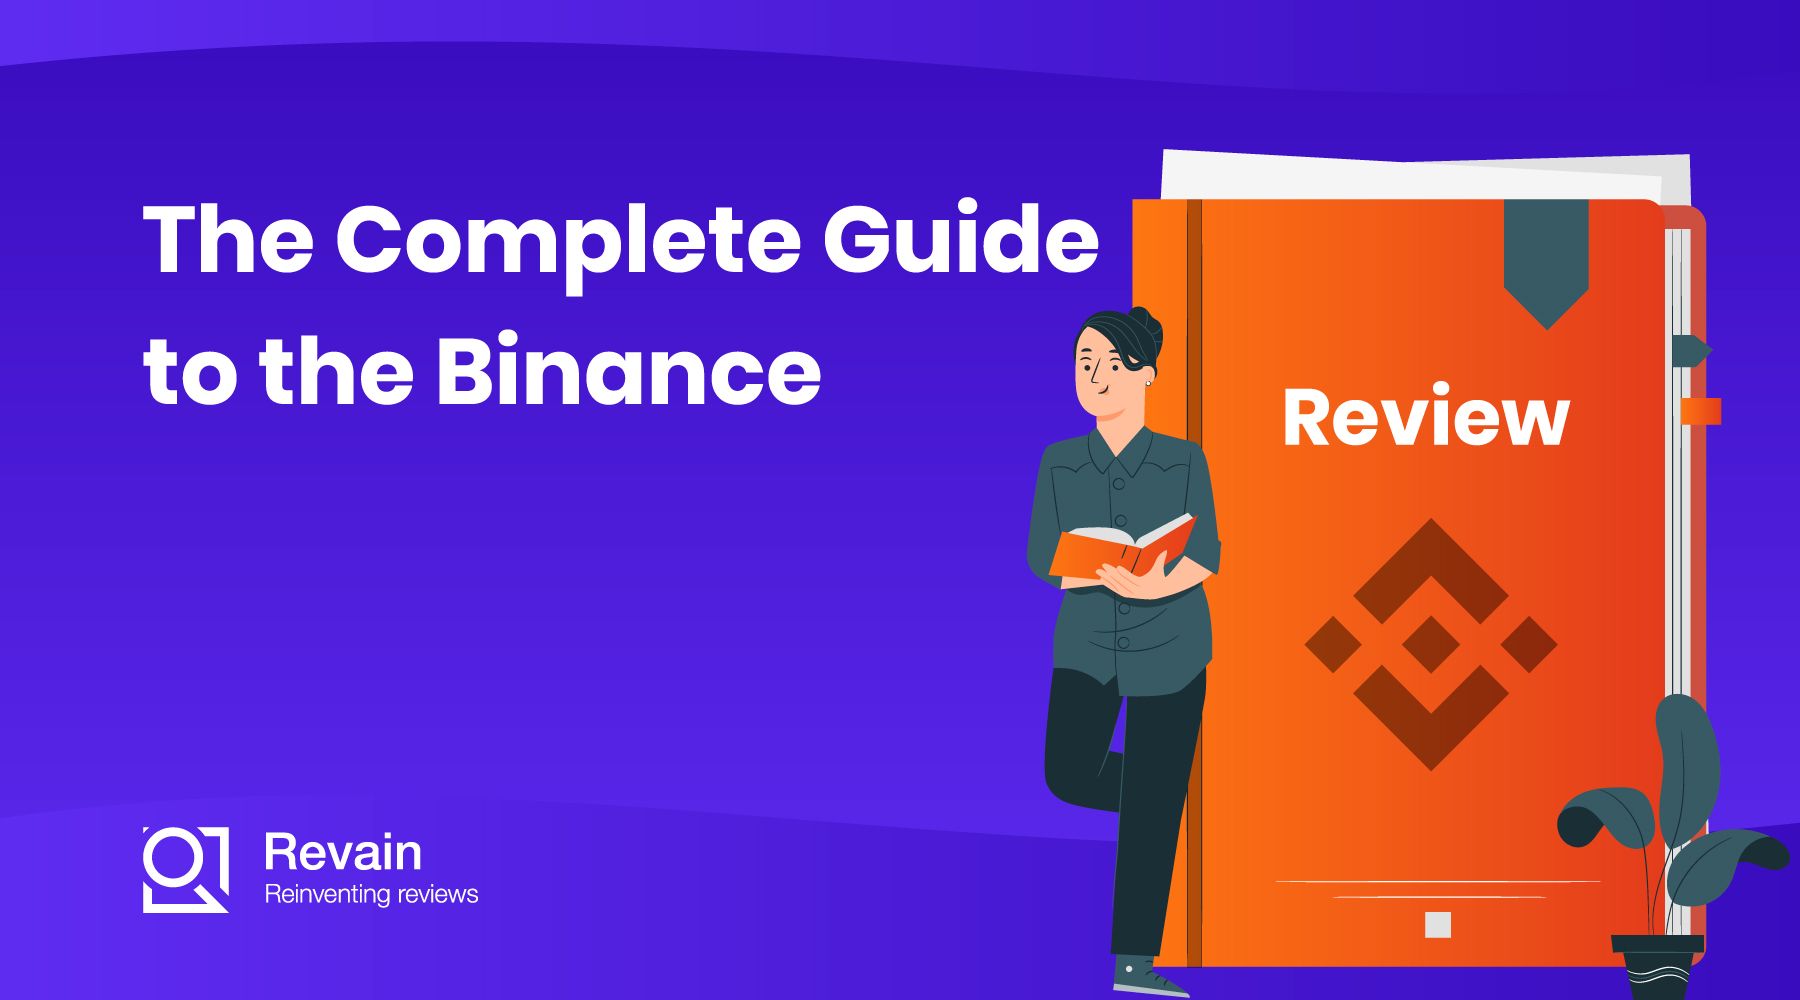 Article The Complete Guide to the Binance Exchange